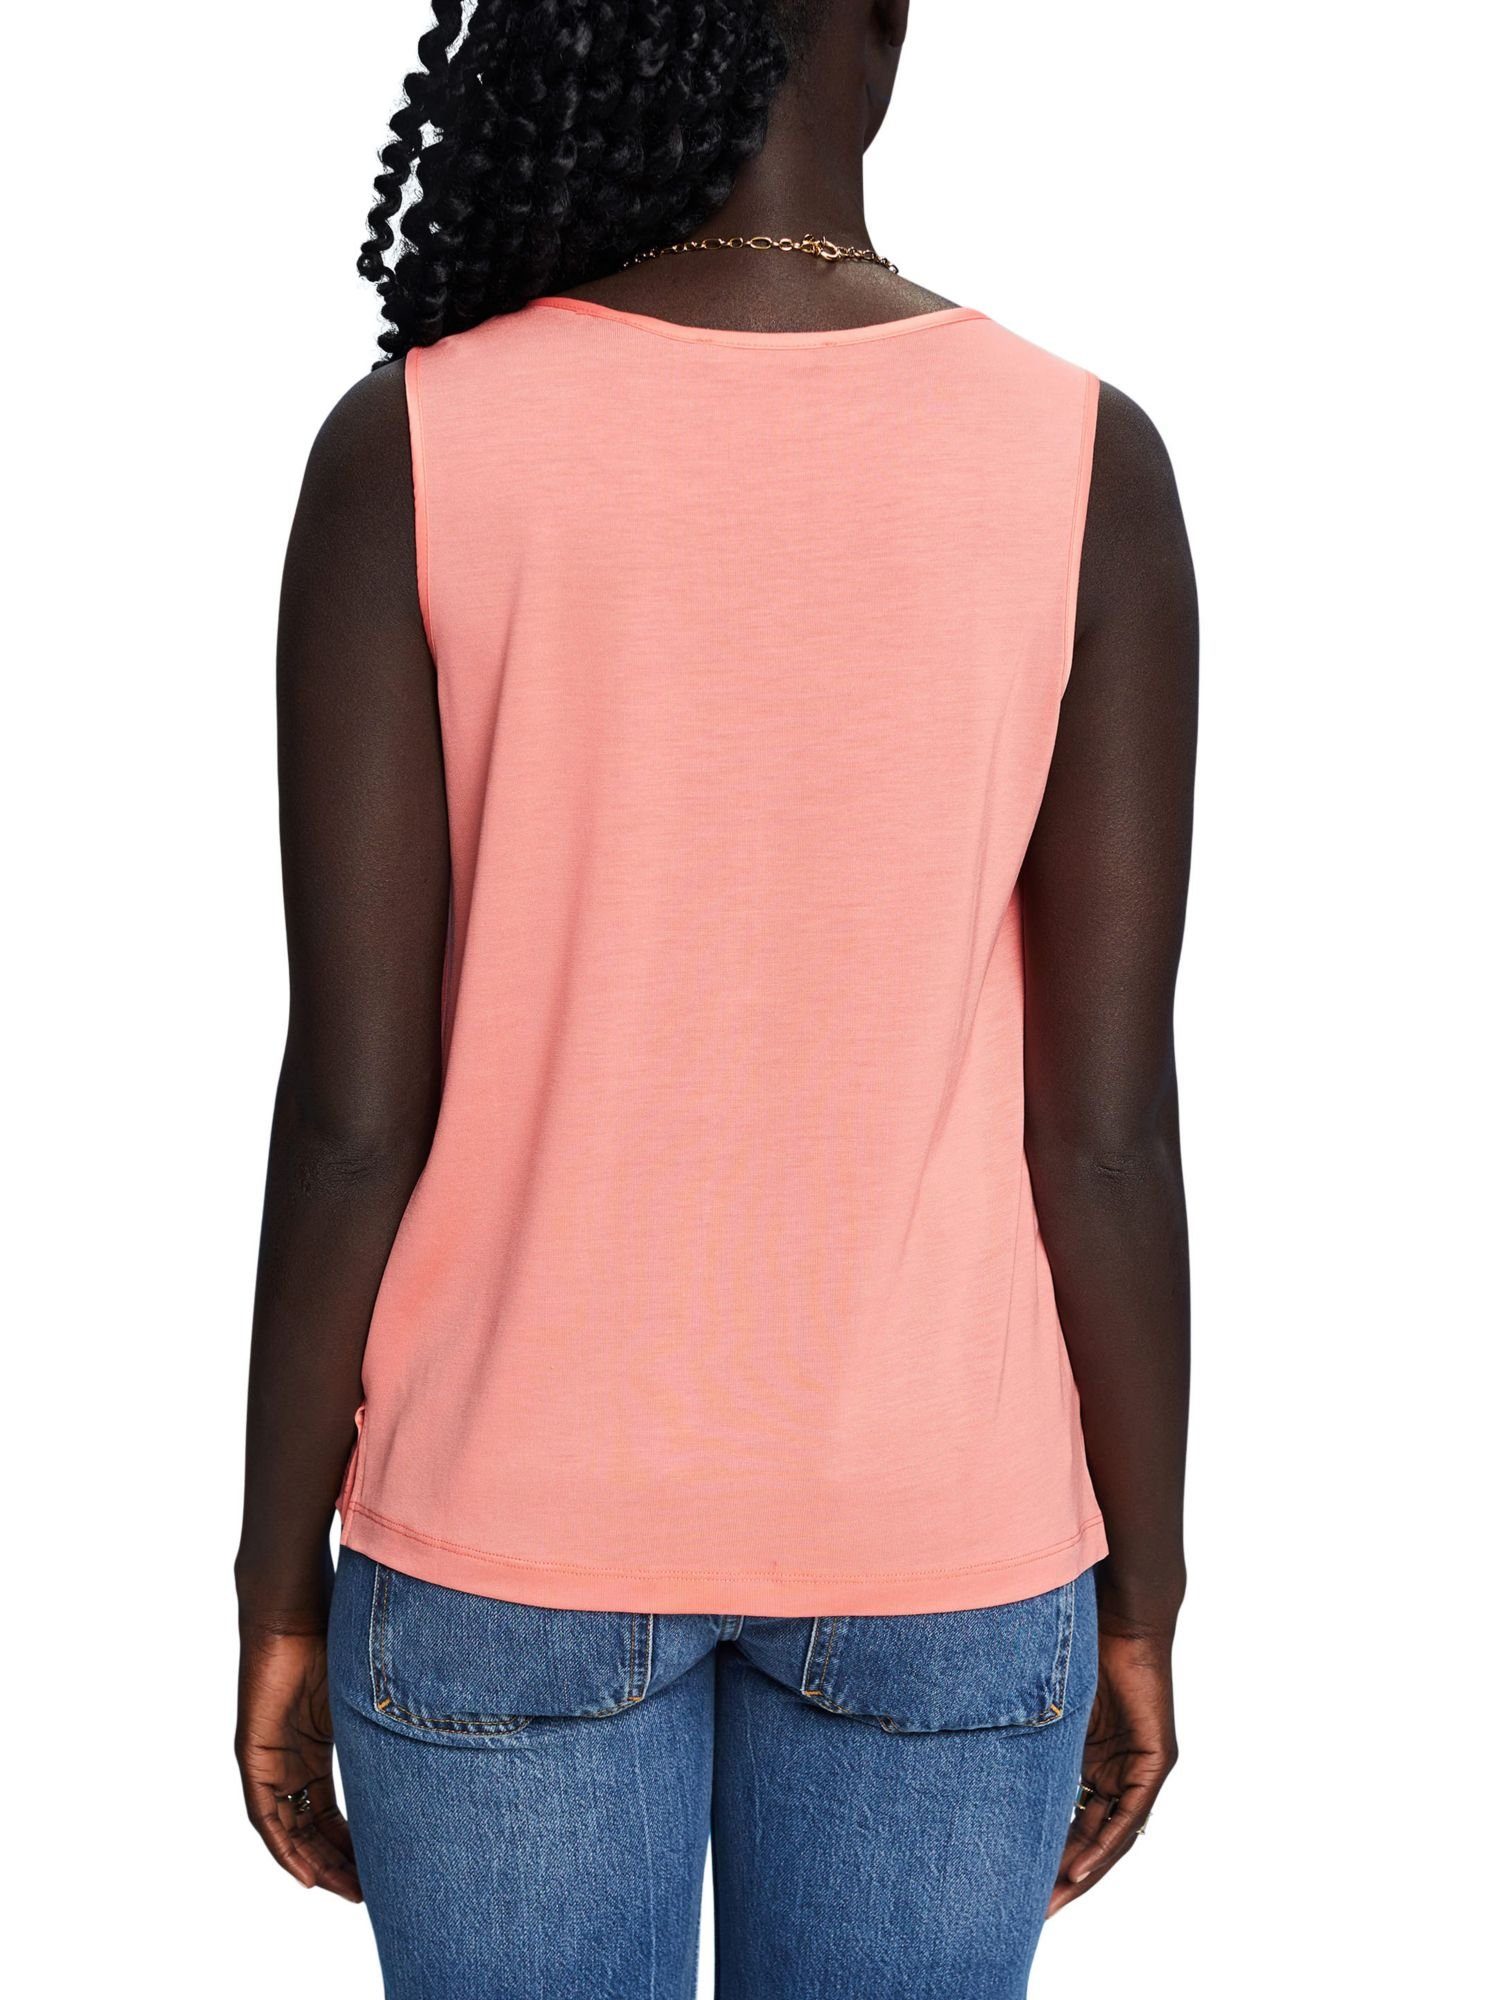 CORAL Top T-Shirt Esprit Lyocell aus Jersey, Collection (1-tlg) TENCEL™